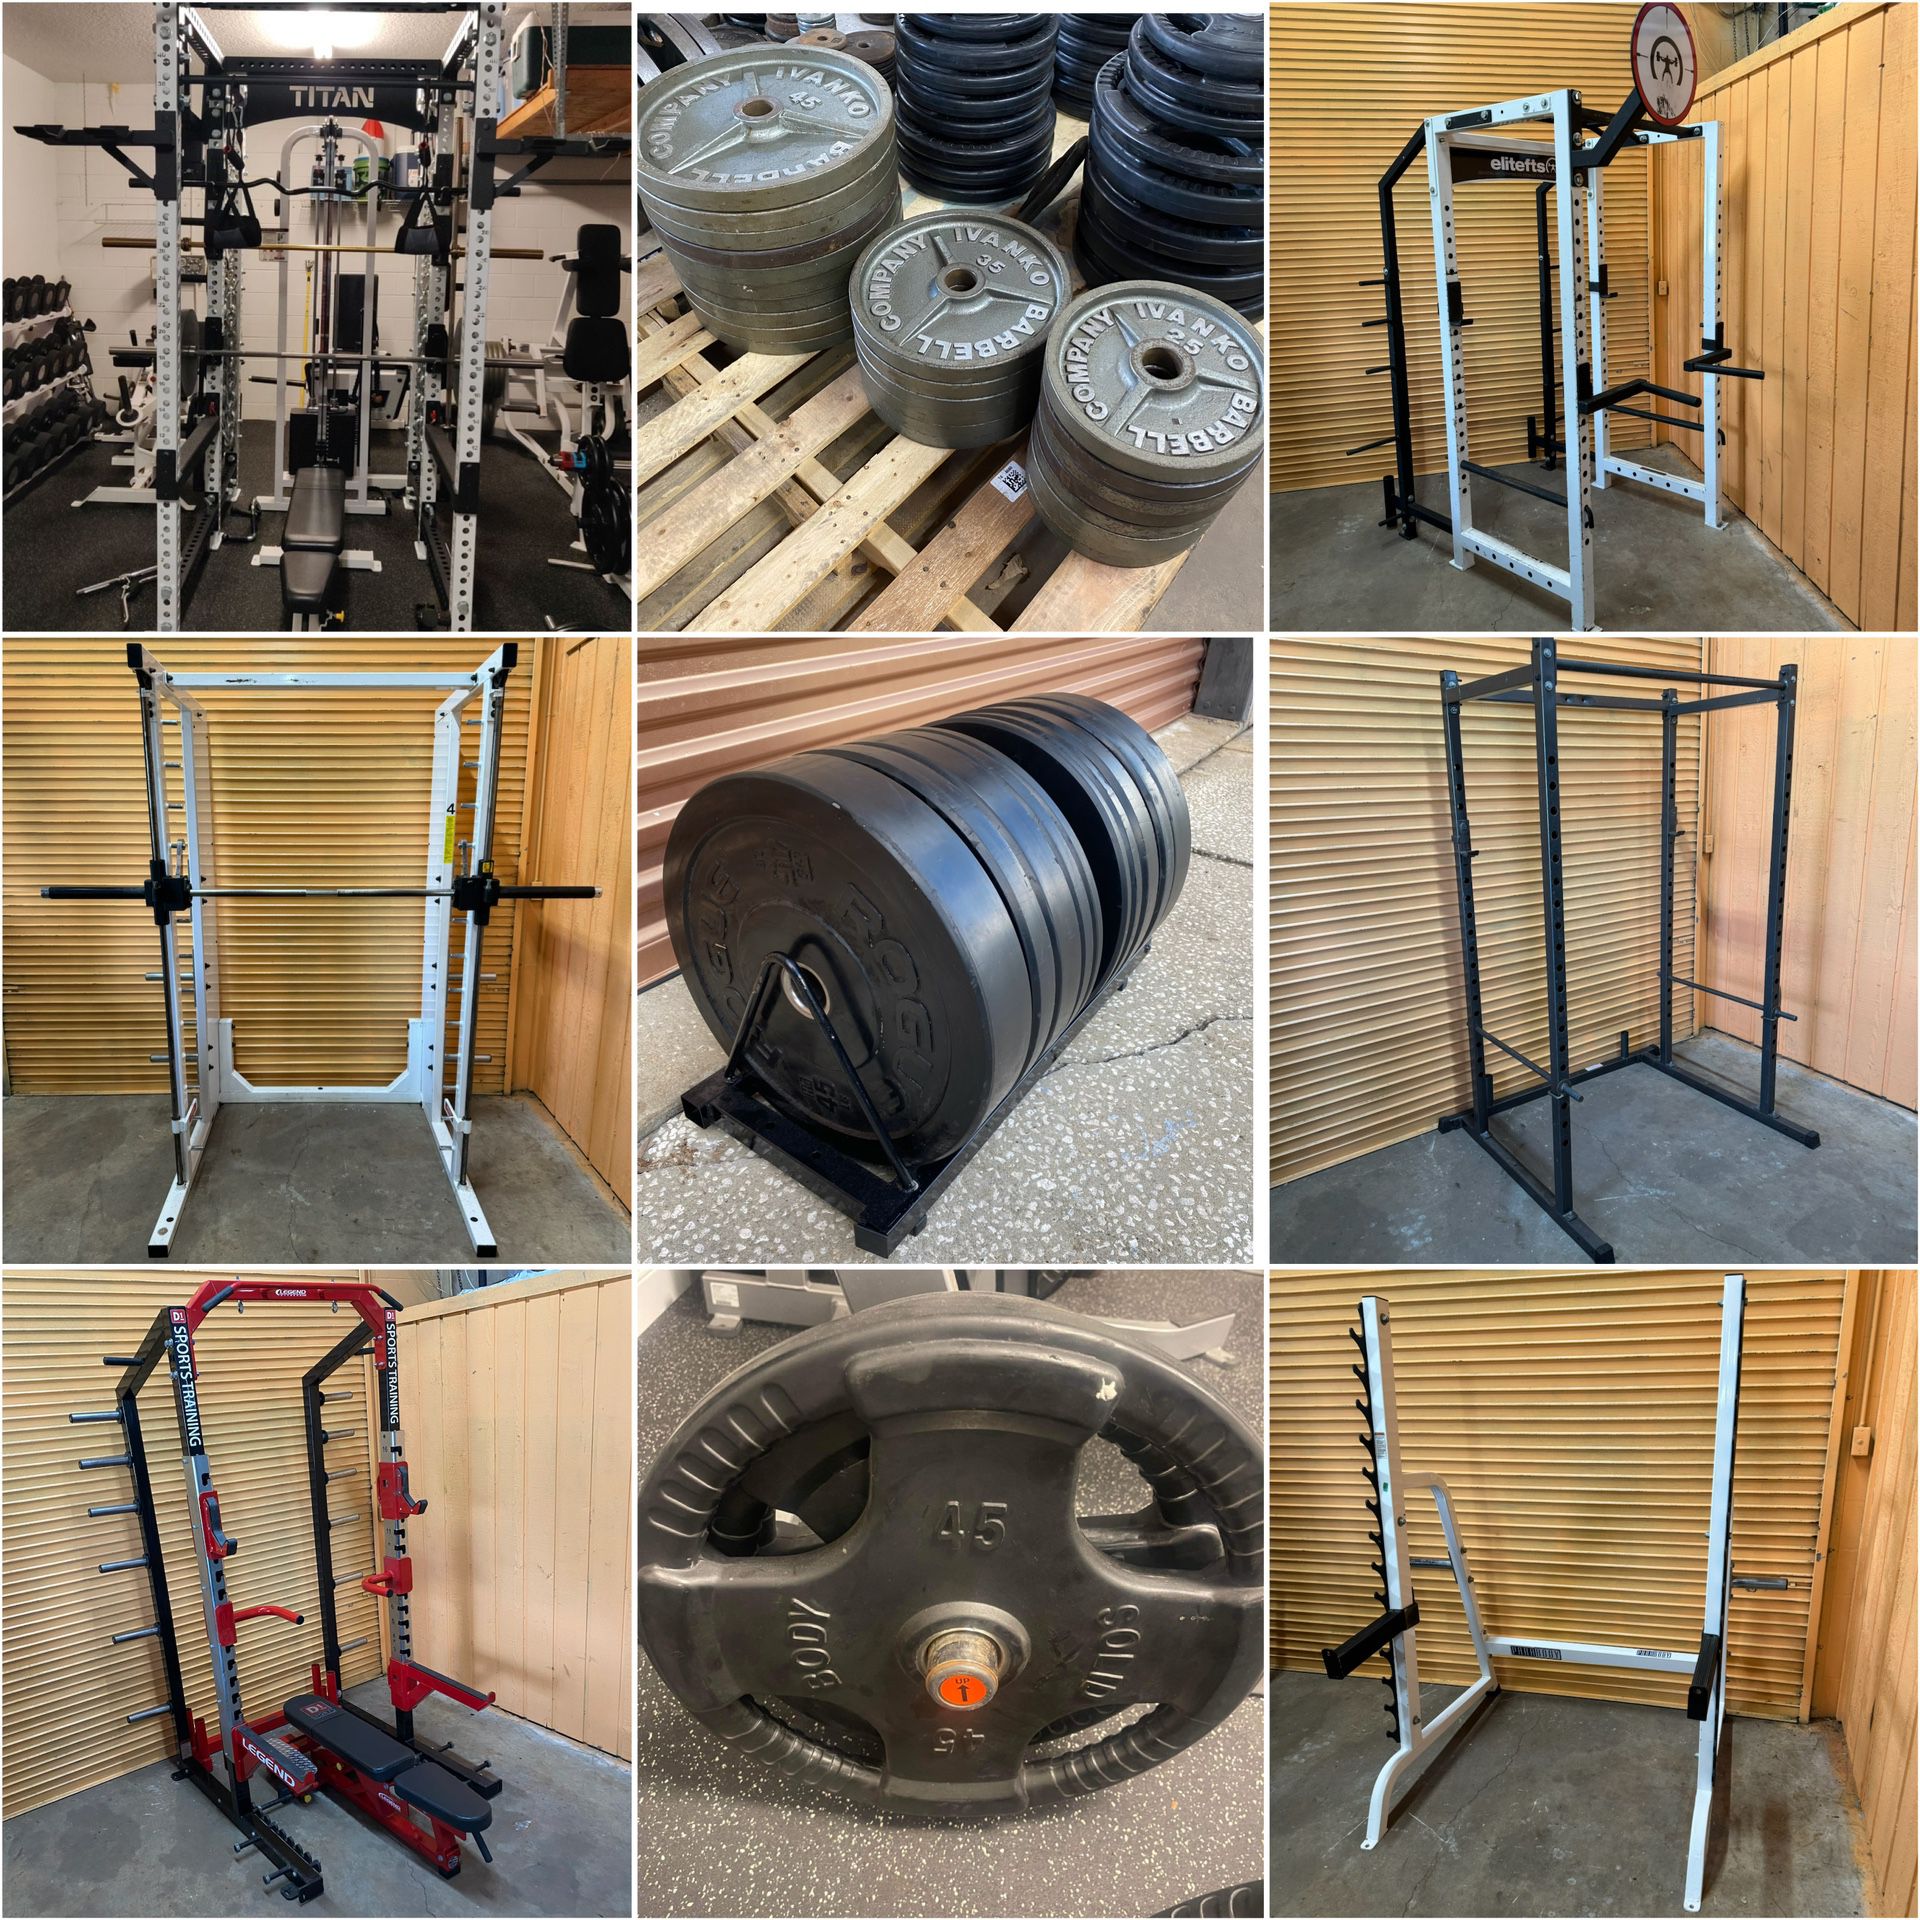 Squat Racks From $200, Olympic Weight Plates, Bumpers, Barbells, Benches, Dumbbells - Custom Bundles